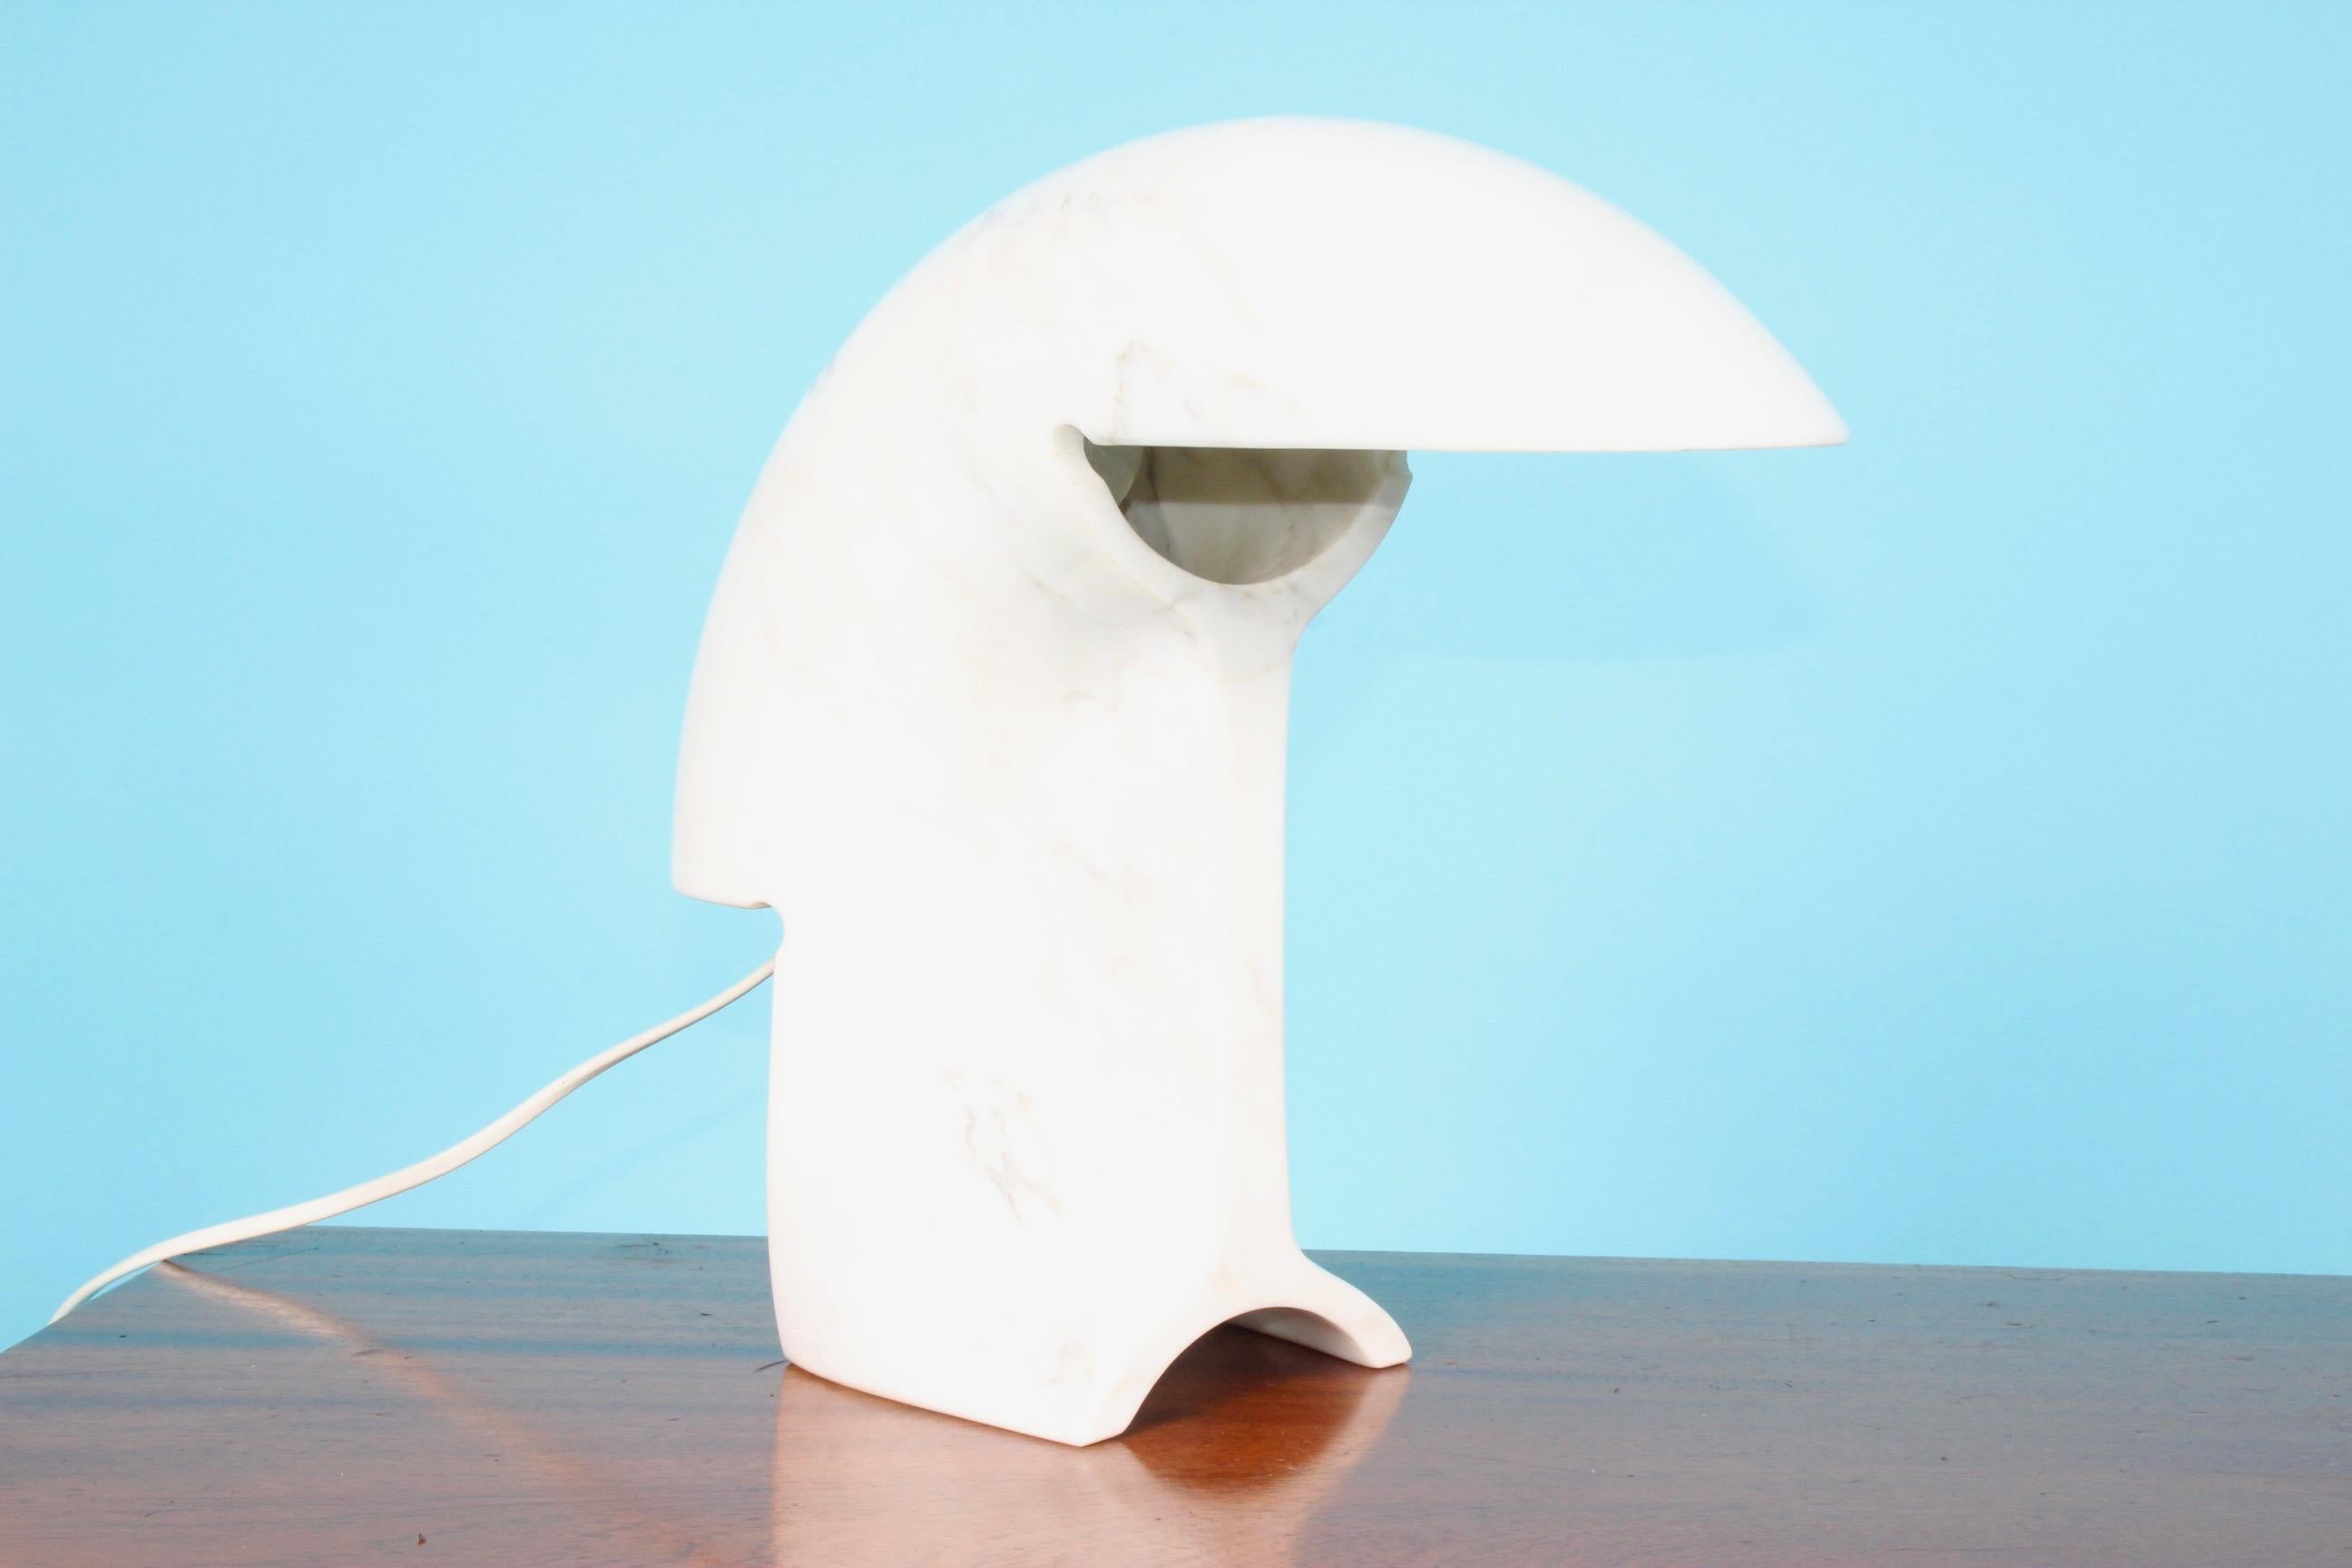 Late 20th Century Italian White Carrara Marble Biagio Table Lamp by Tobia Scarpa for Flos